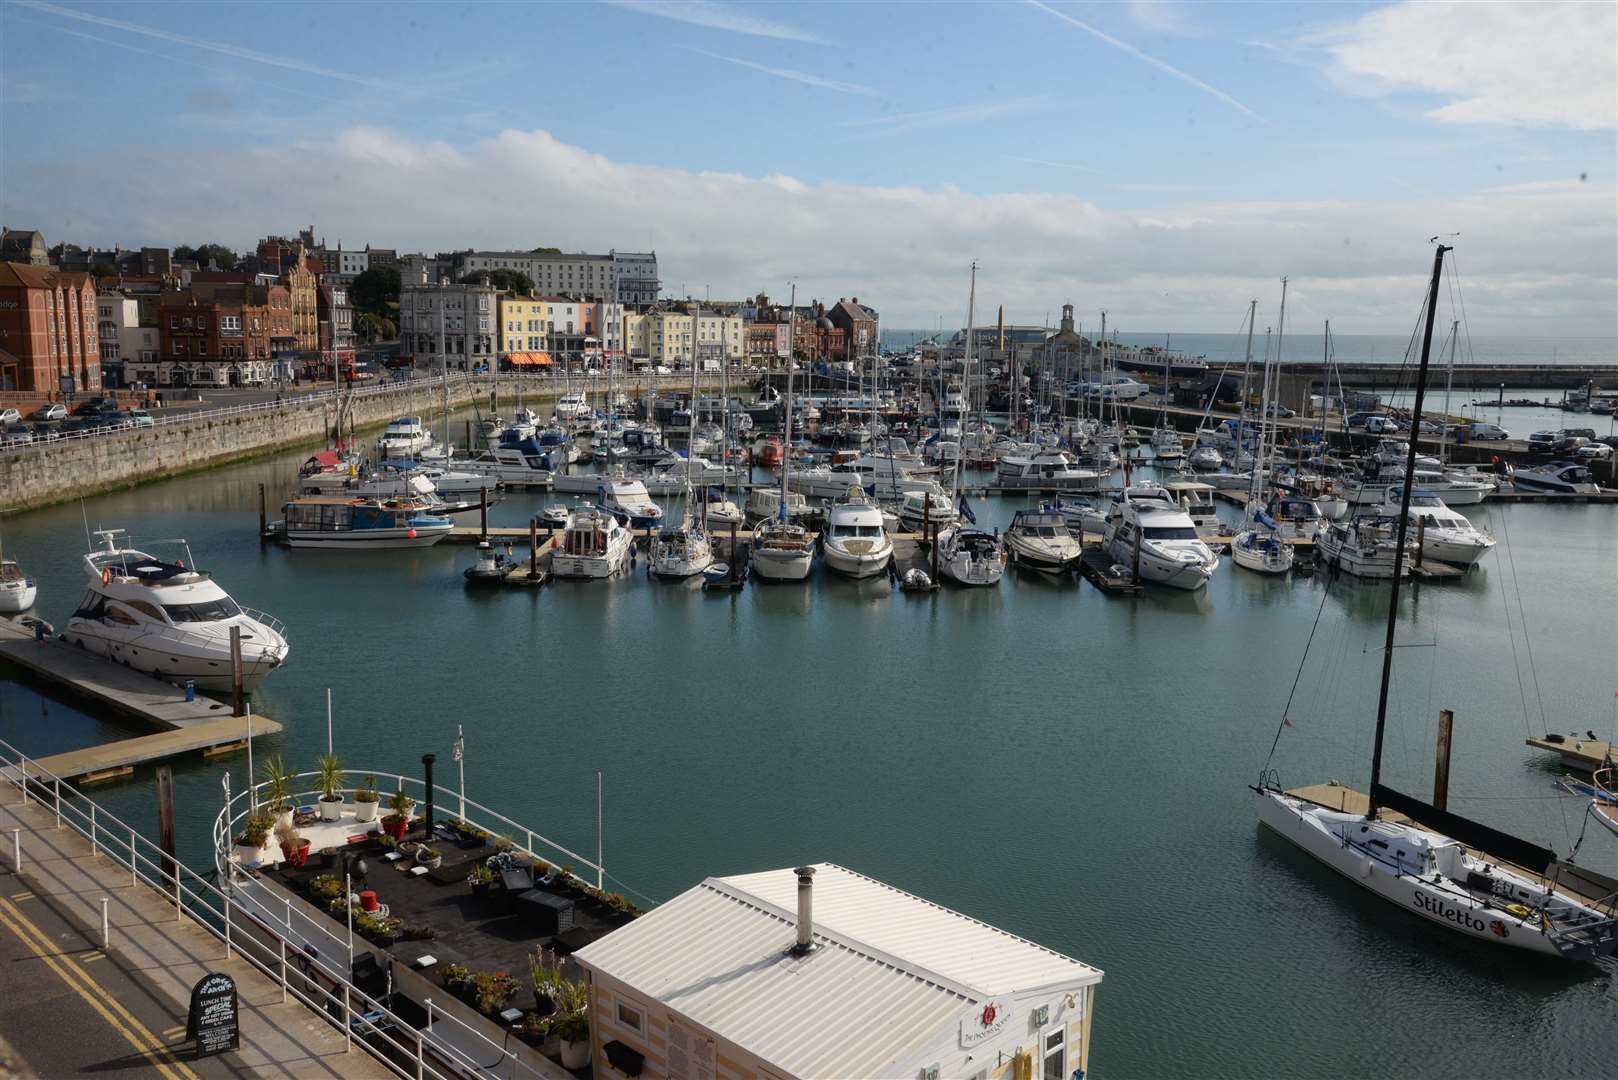 The Royal Harbour, Ramsgate. Picture: Chris Davey.